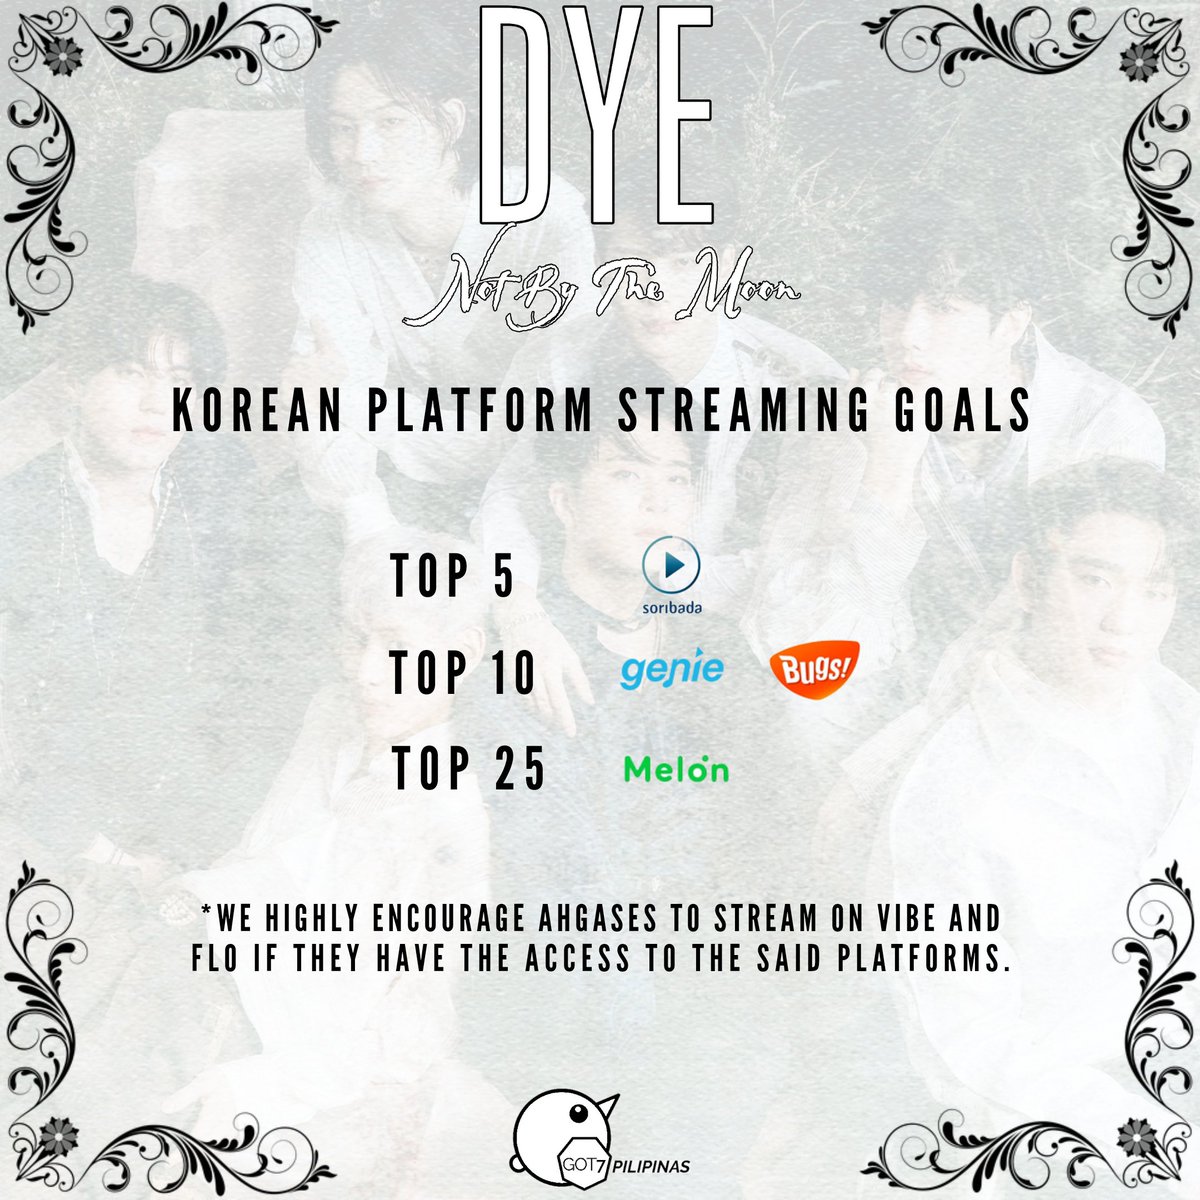  K-Platform Streaming Goals  Let's work hard to reach these goals, Fam. Our fandom is focused on the 4 streaming platforms: MelOn, Genie, Bugs, & Soribada. We encourage you to stream on FLO & VIBE if you have the ability to do so. #GOT7    #GOT7_DYE    #GOT7_NOTBYTHEMOON  